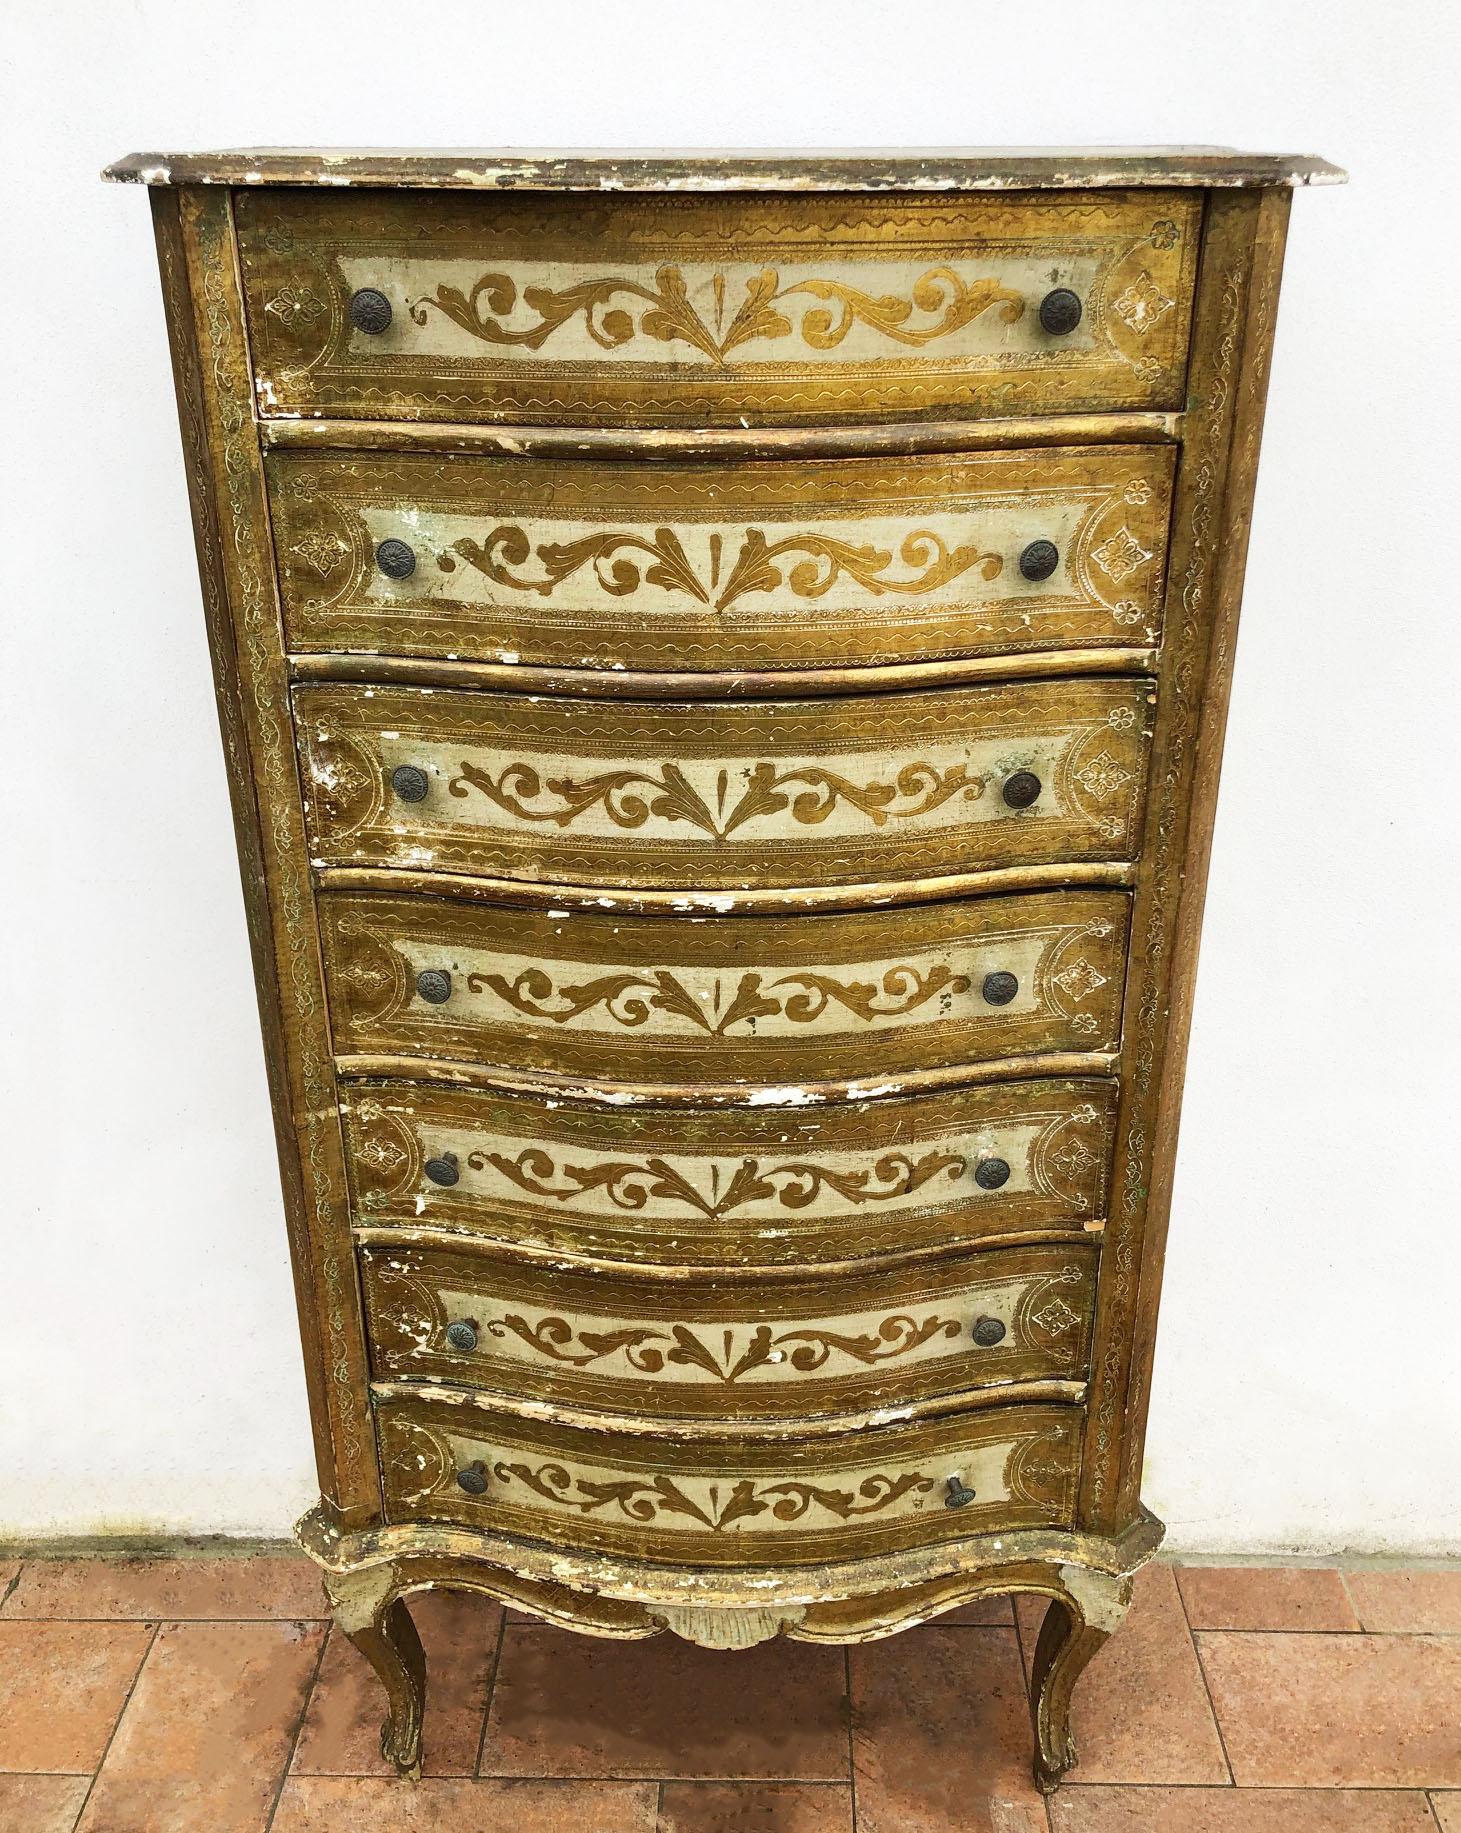 Venetian style chest of seven drawers from 1960, original worn painting
Very practical and elegant piece of furniture.
Comes from an old city house in the Florence area of Tuscany.
The paint is original in patina, honey amber color. 
As shown in the